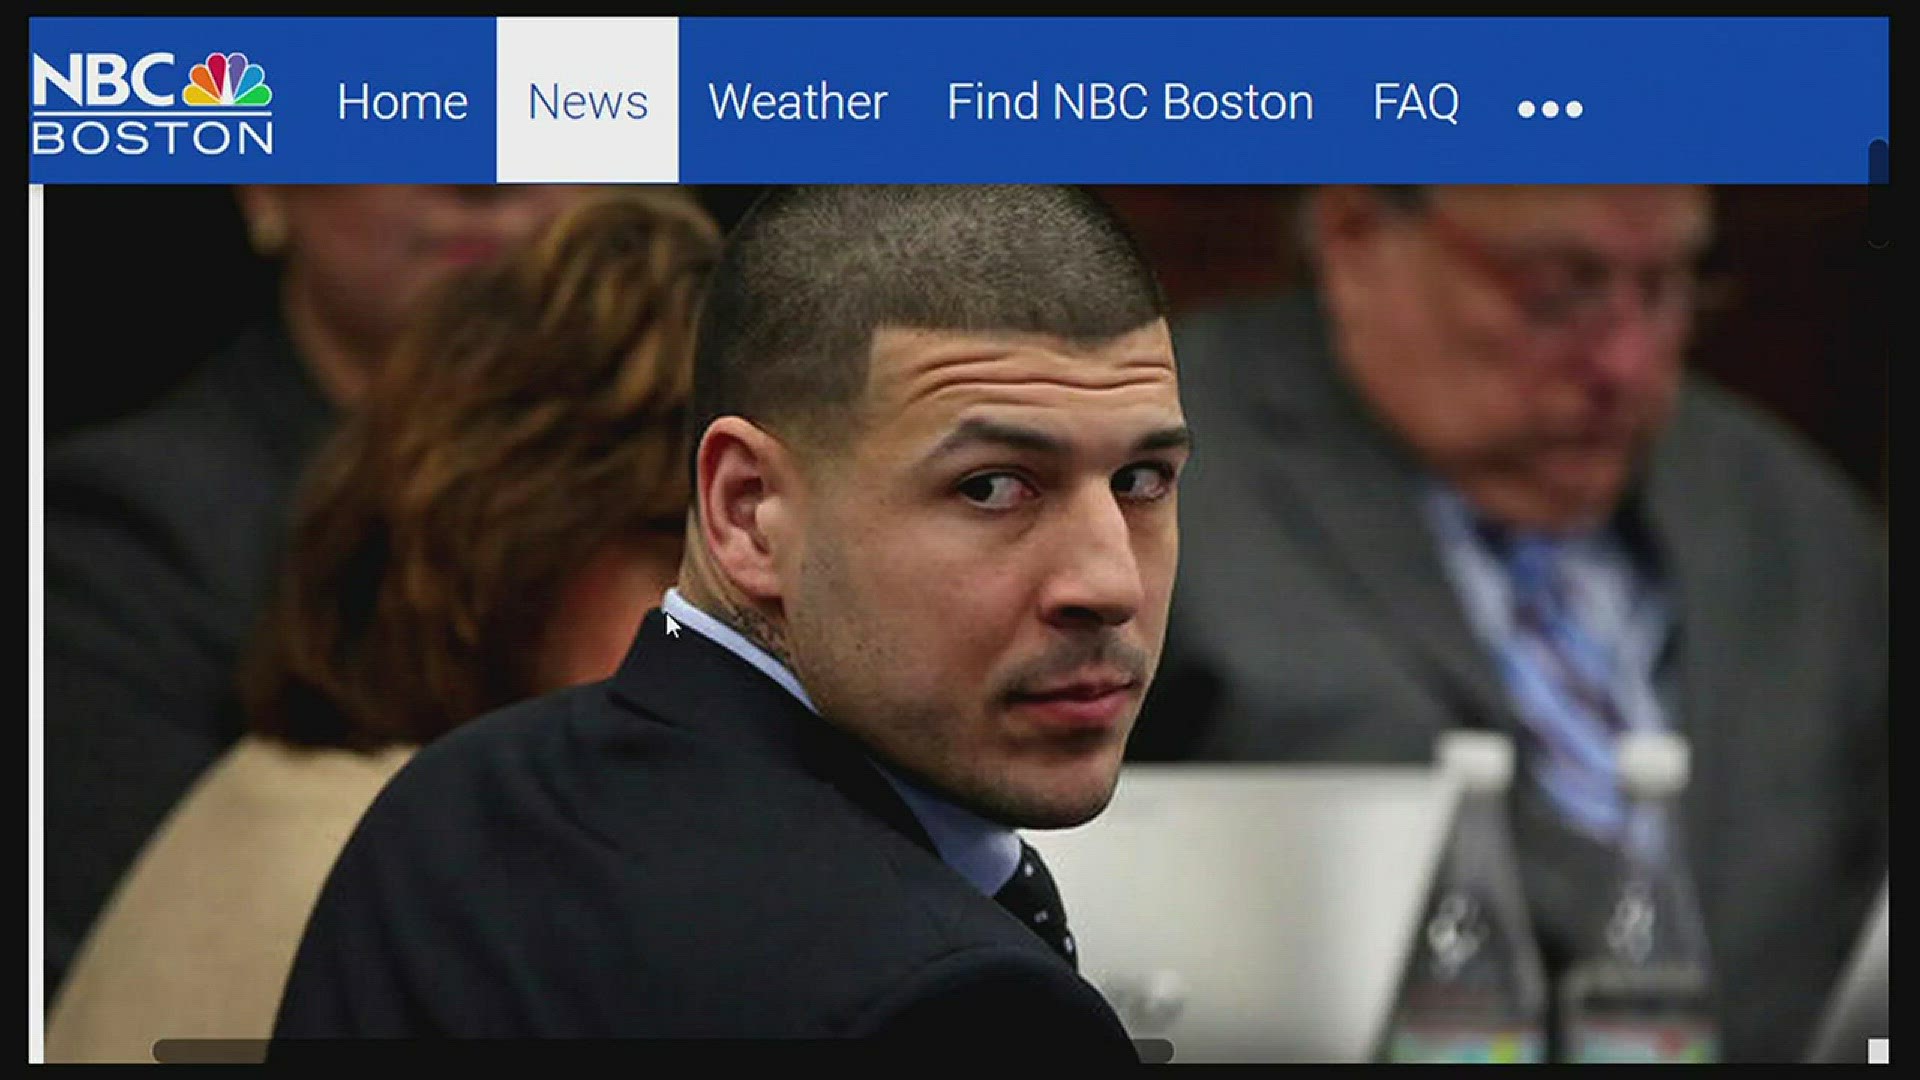 The former New England Patriot was acquitted of all but one charge Friday over the 2012 killings of Daniel de Abreu and Safiro Furtado.